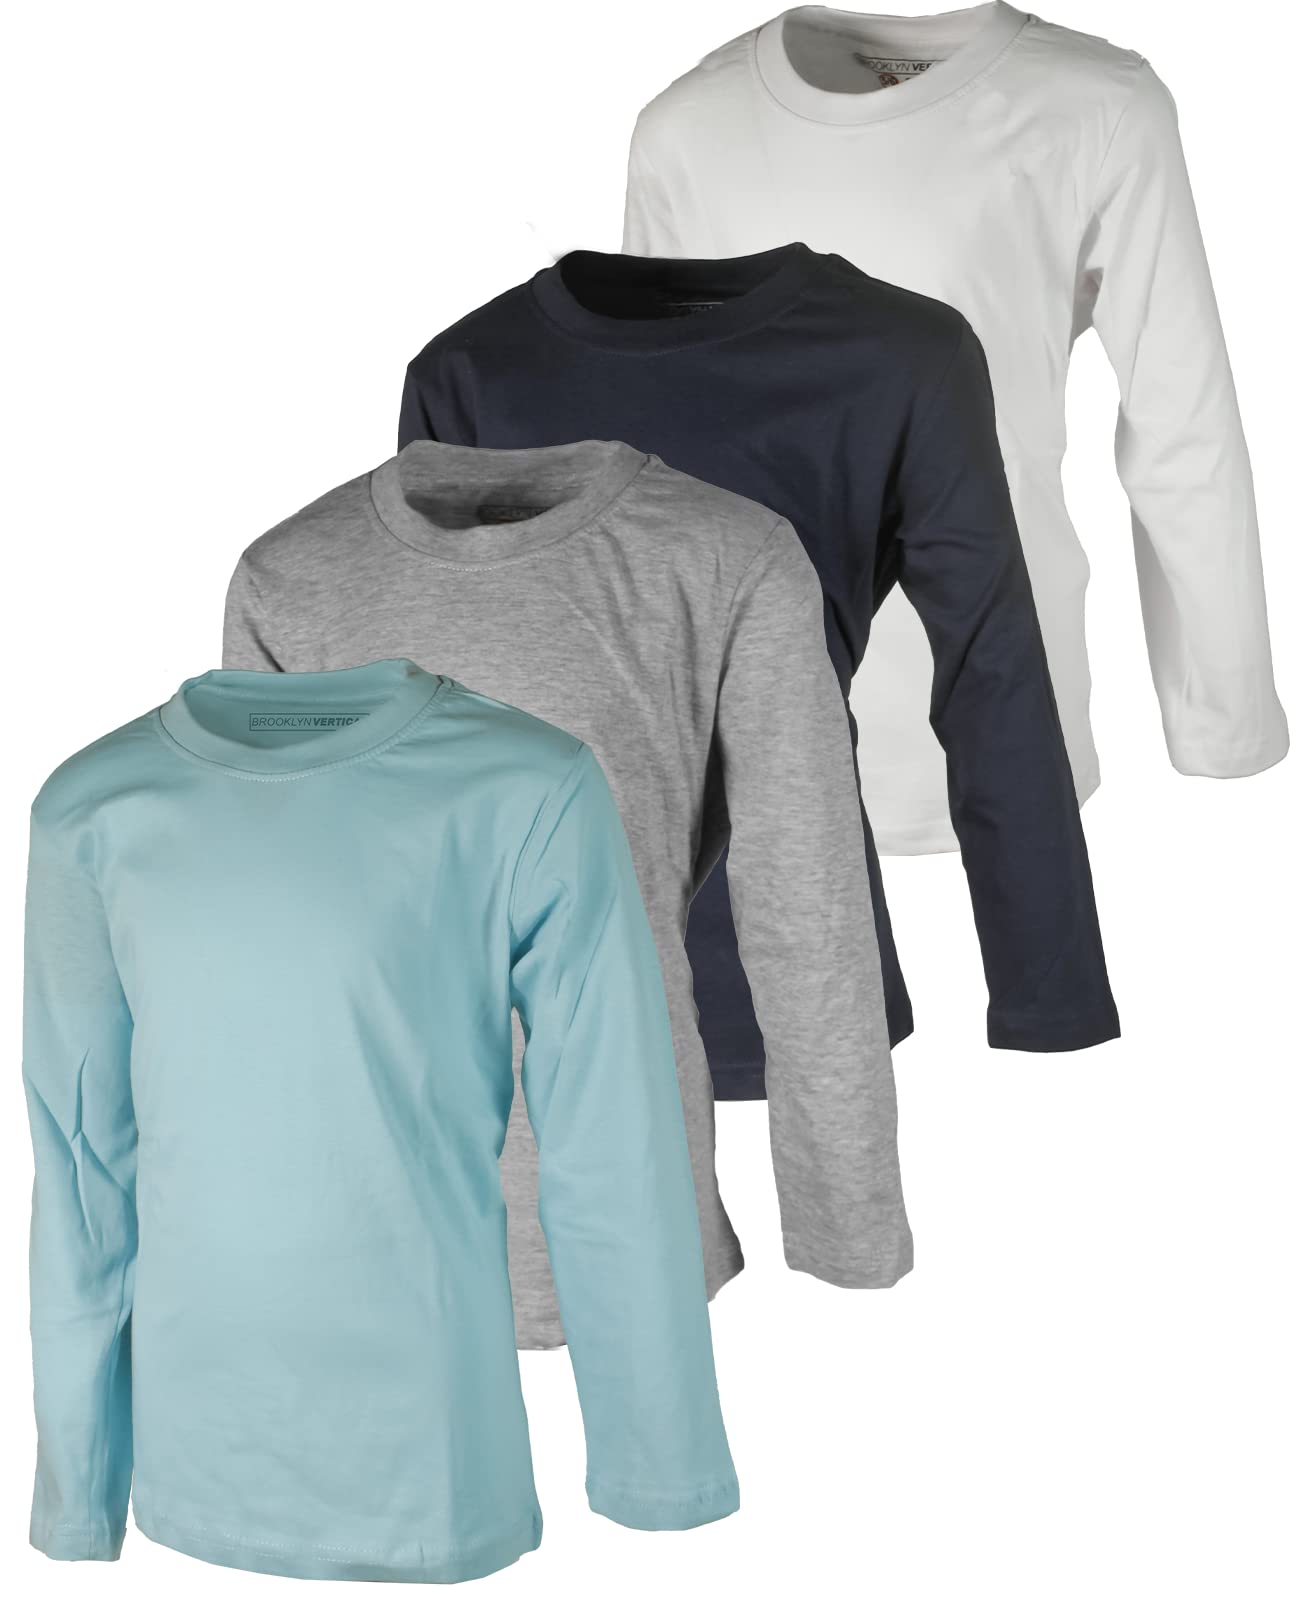 Boys 4 Pack Long Sleeve Soft Cotton Tagless Crew Neck Tee Shirts| Sizes 2T to 18/20